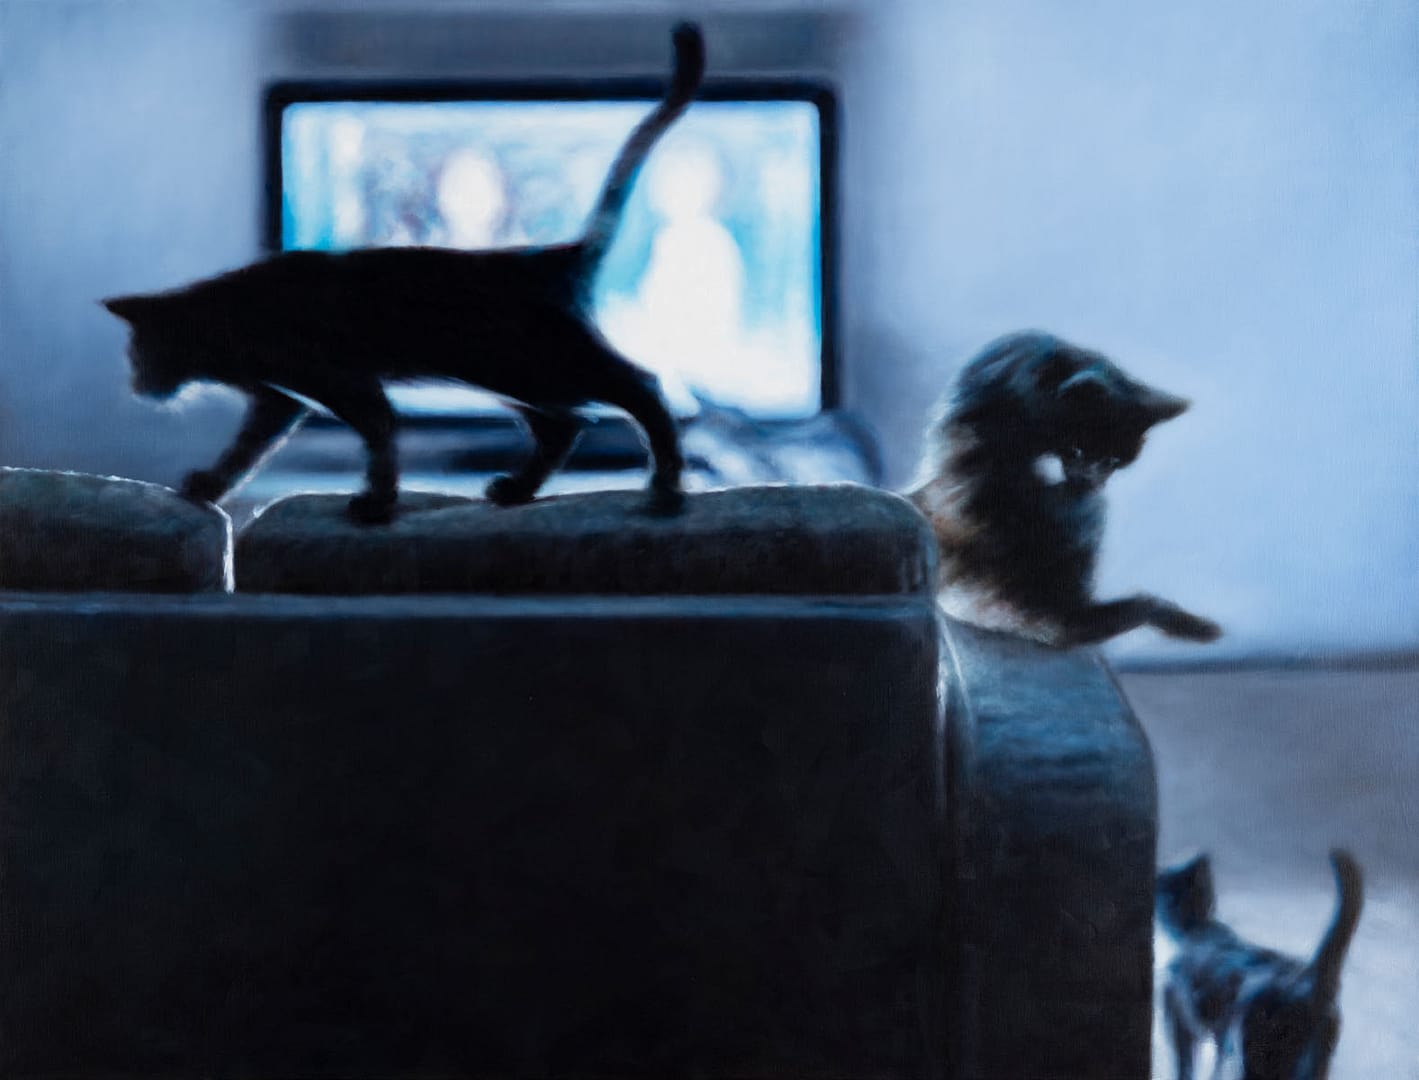 An oil painting by Philipp Fröhlich showing four cats climbing over and around a sofa standing in front of a lit television set.